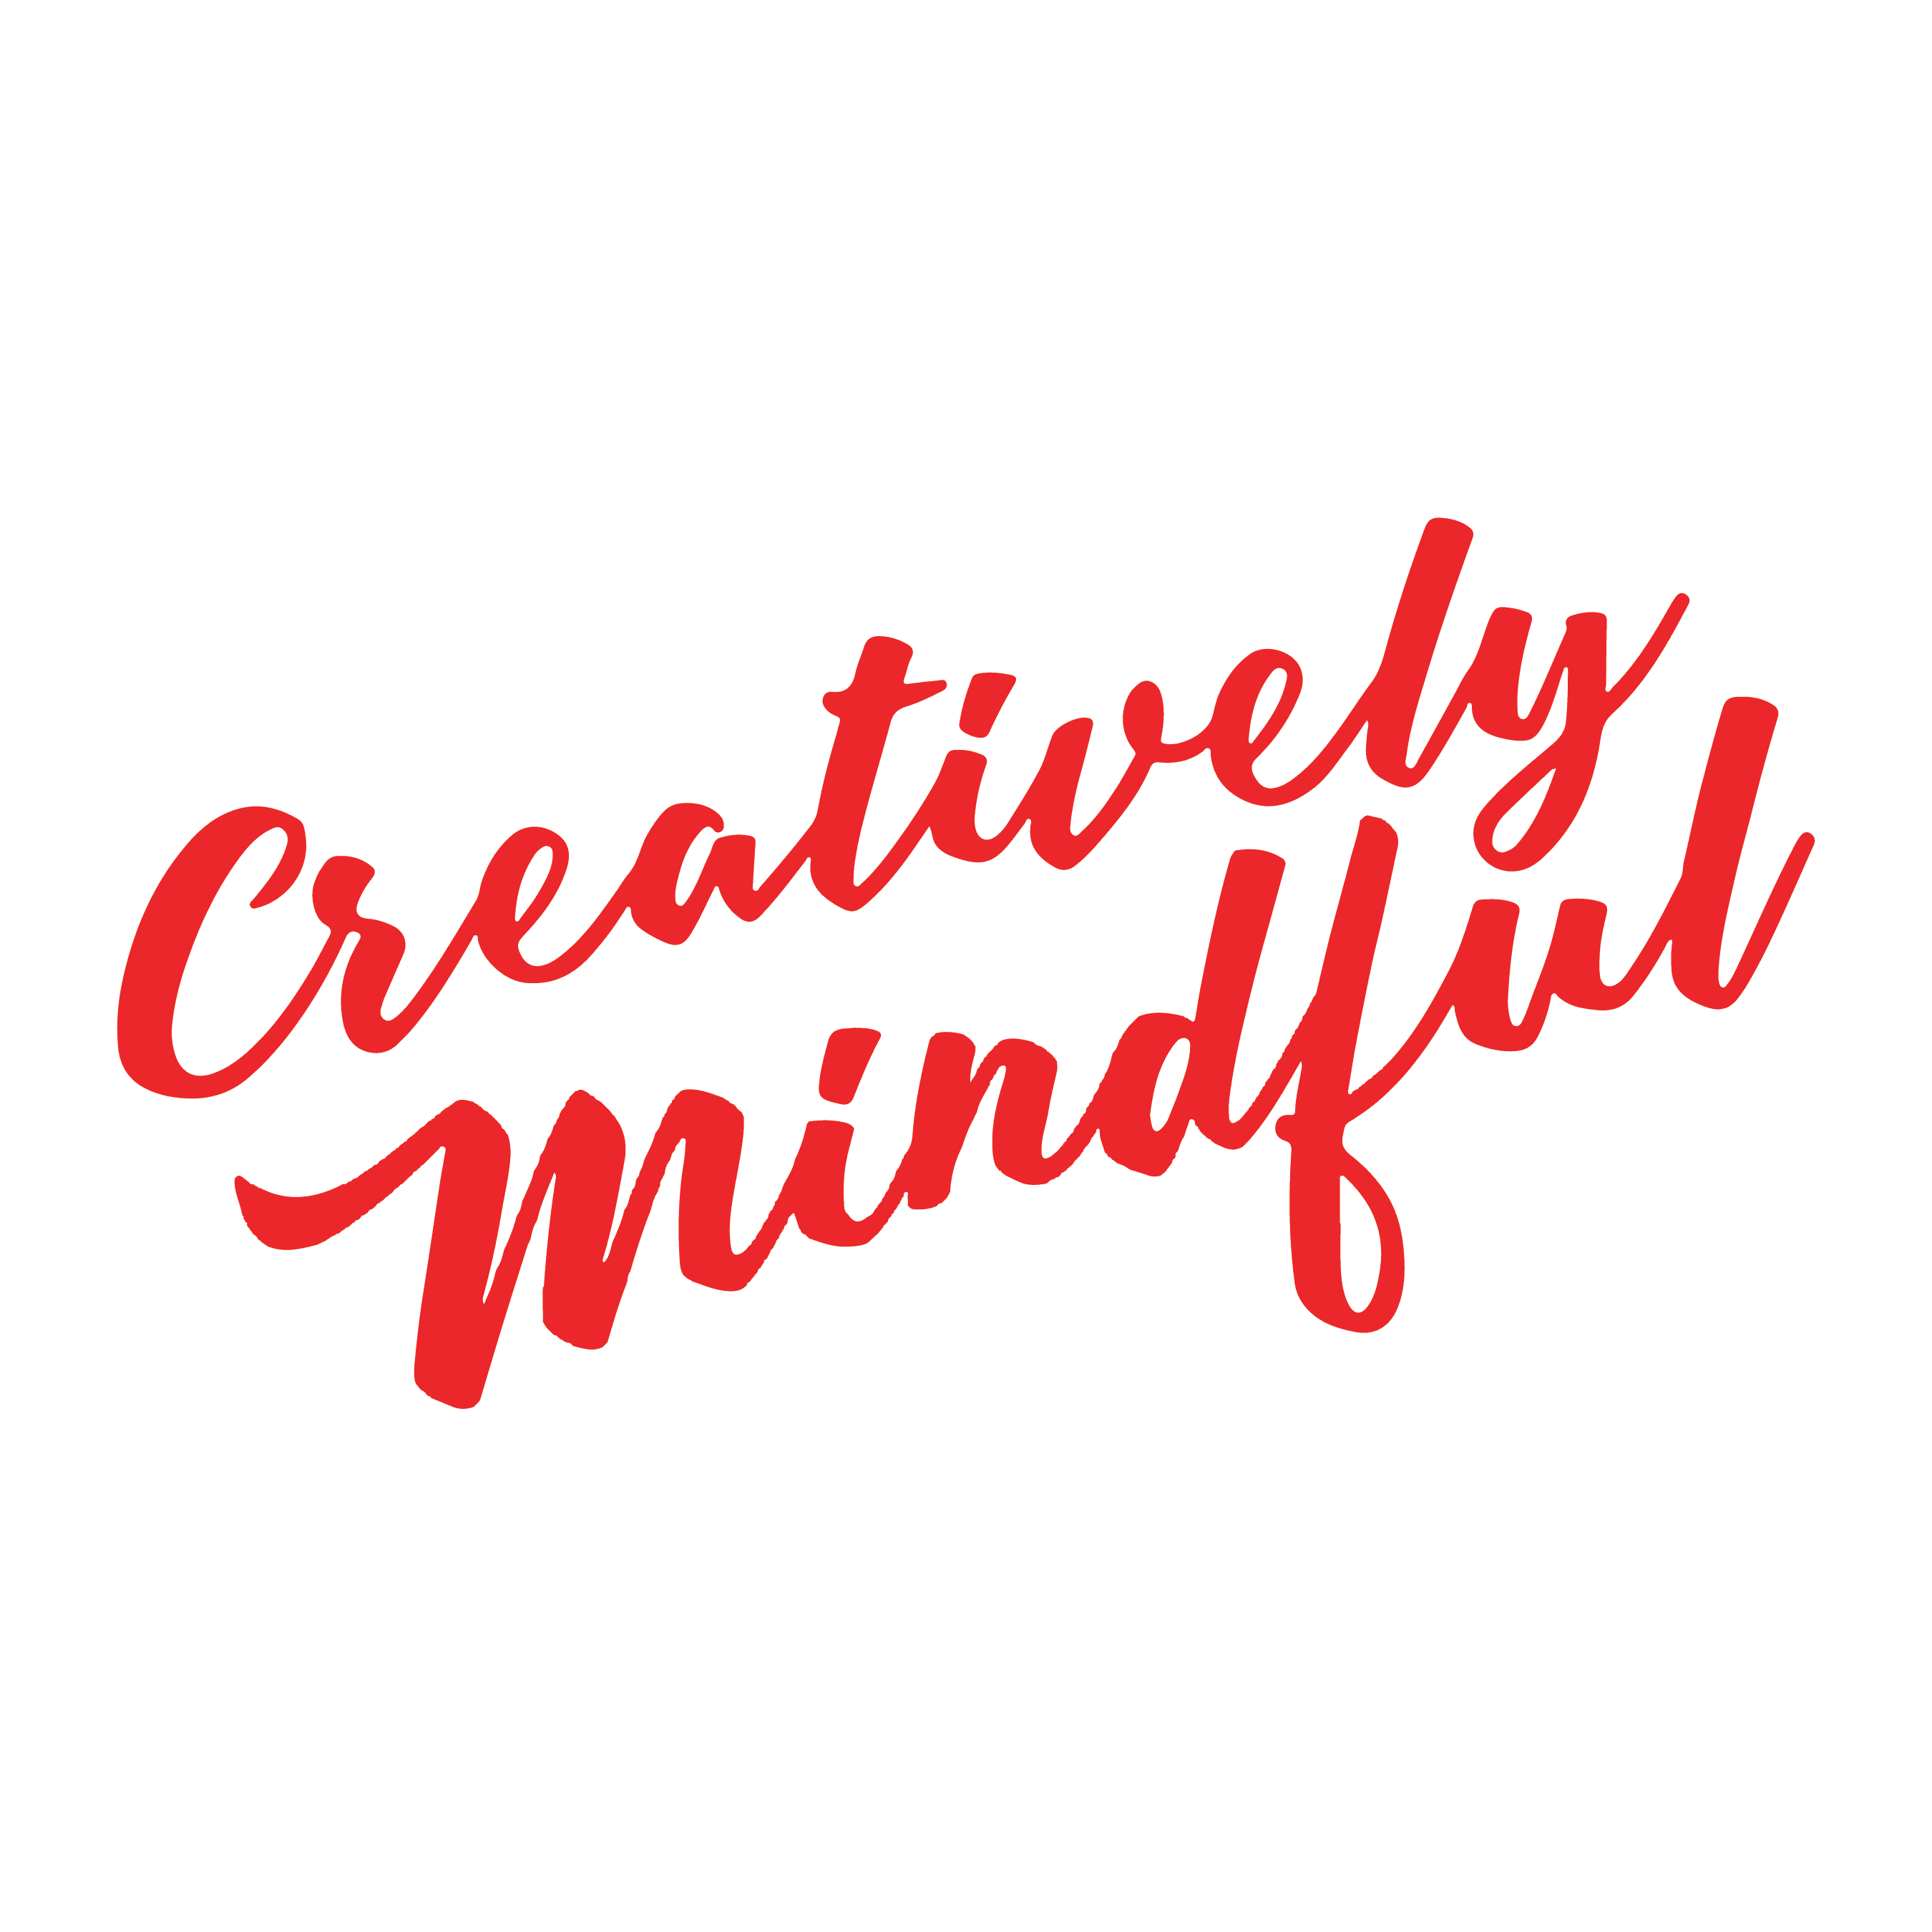 Creatively Mindful